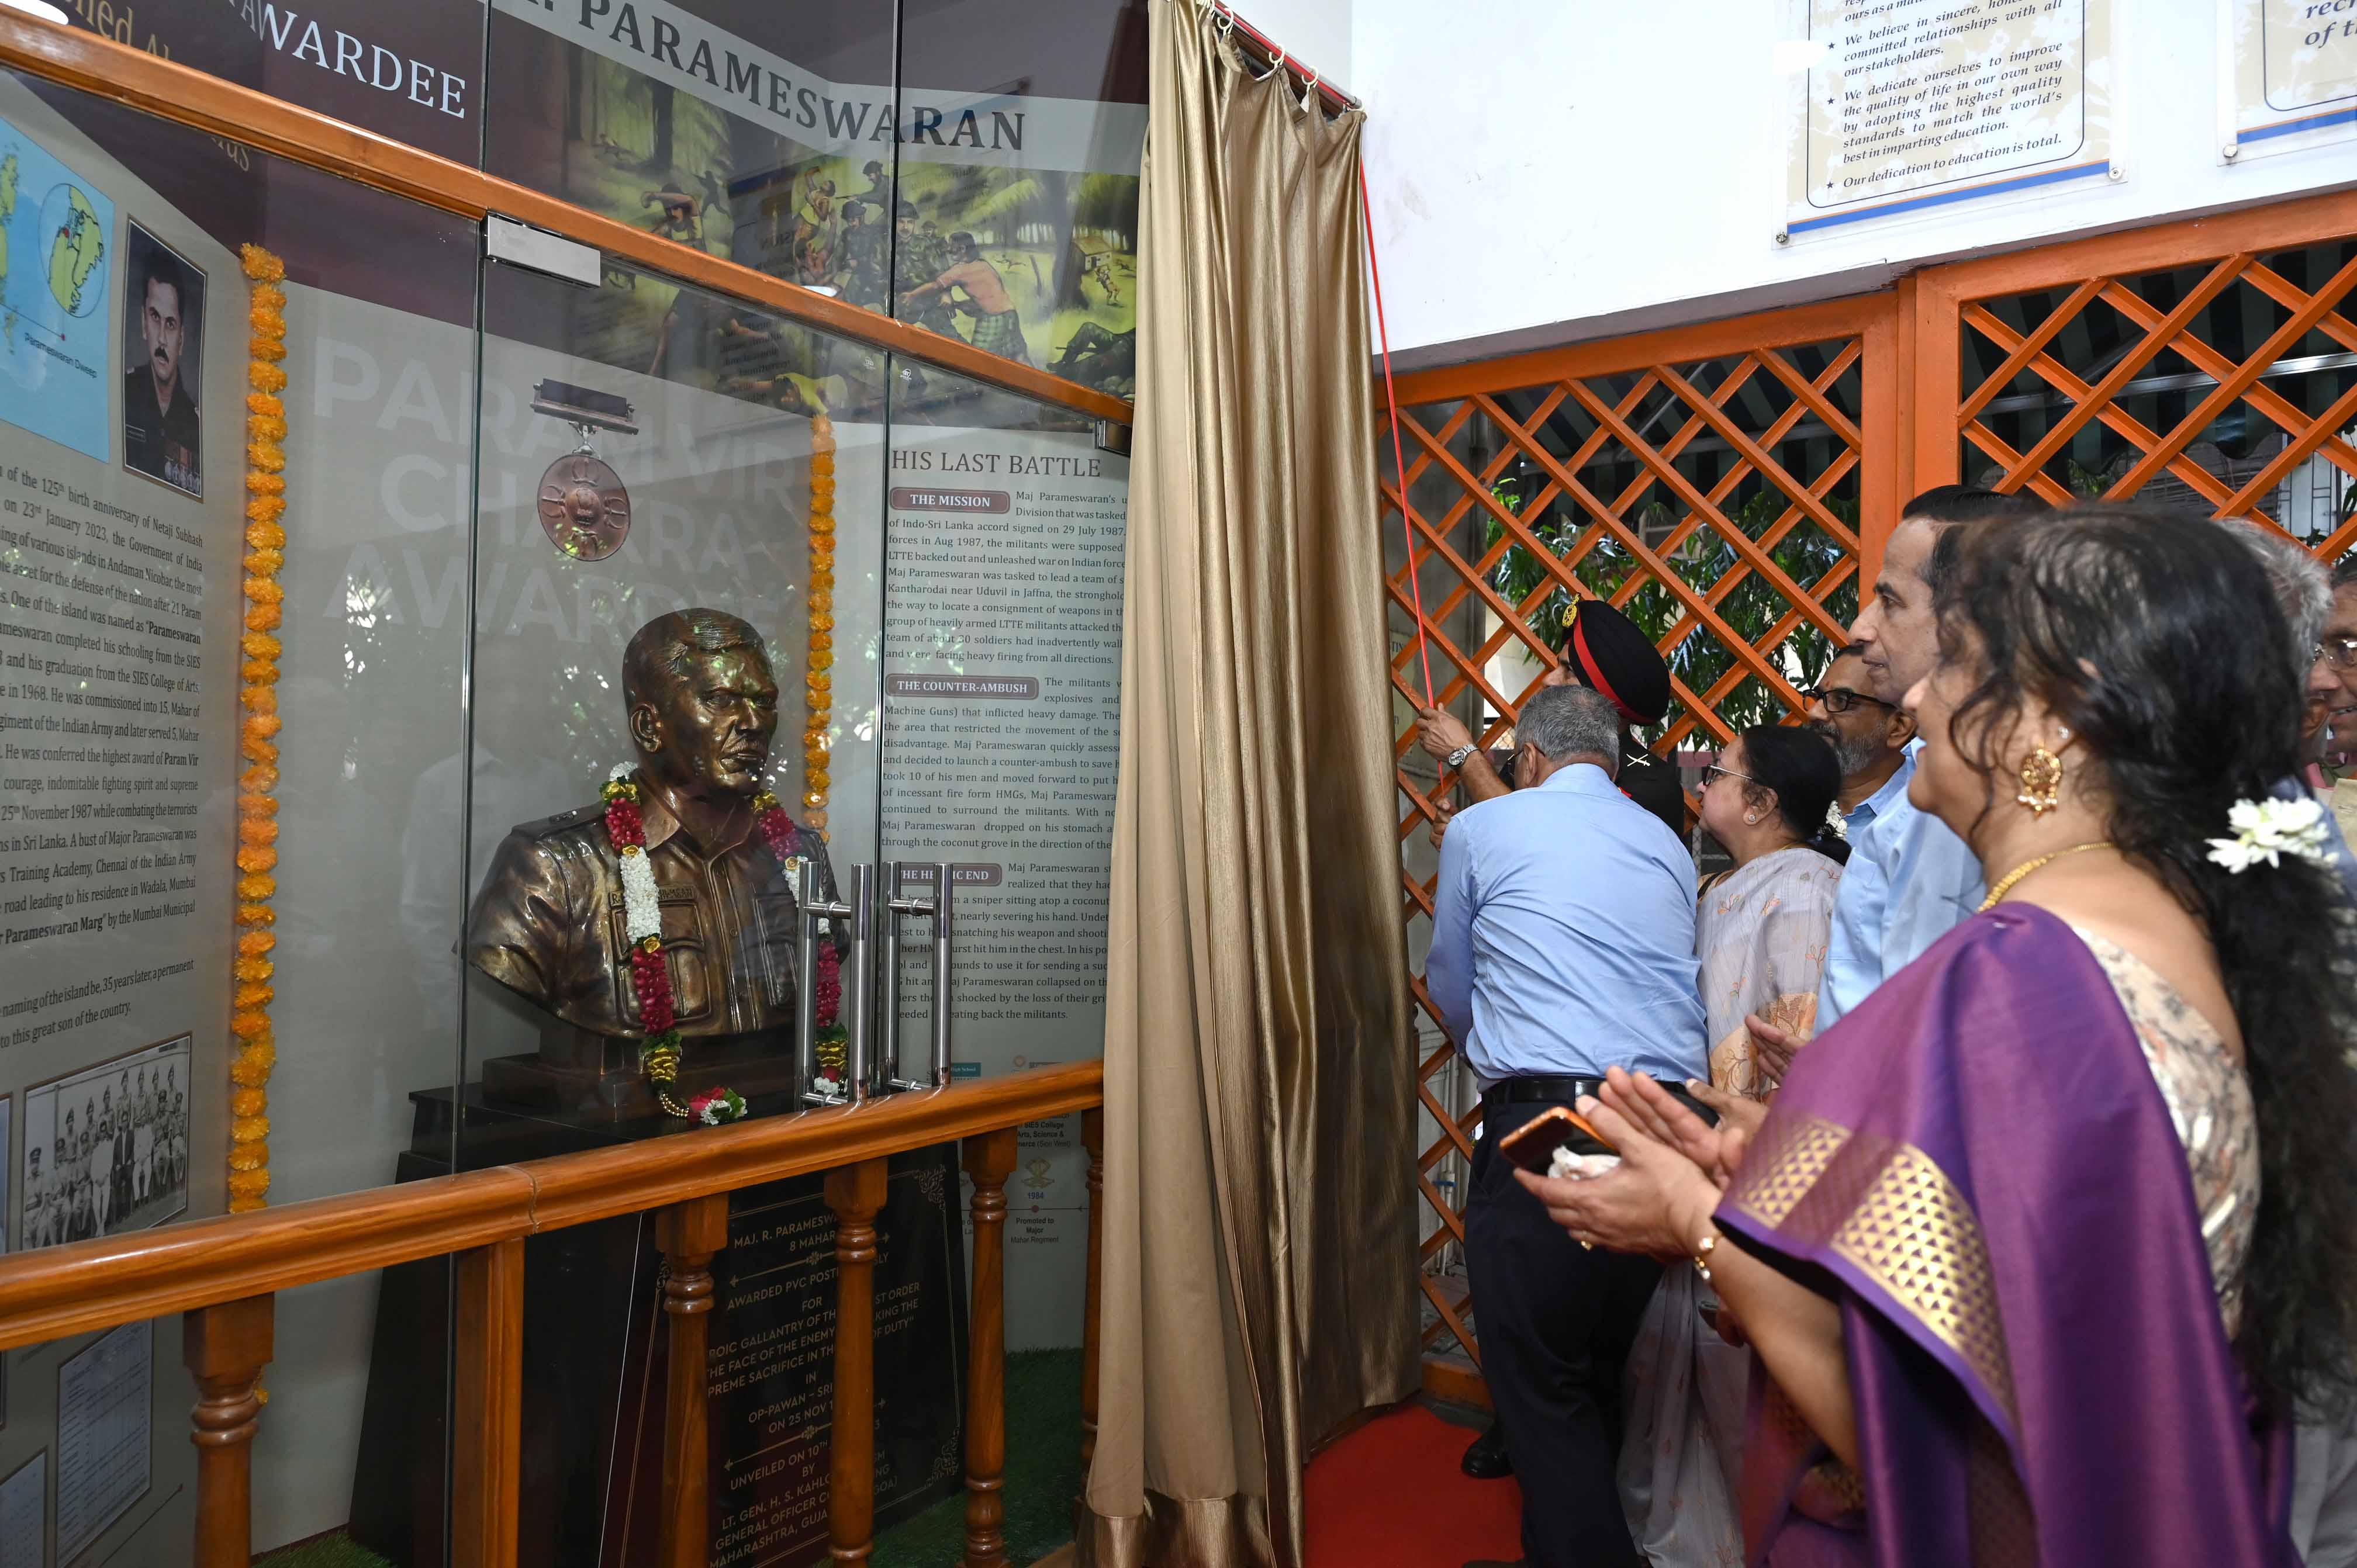 unveiling the bust of pvc major r. parameshwaran on saturday, 10th june 2023